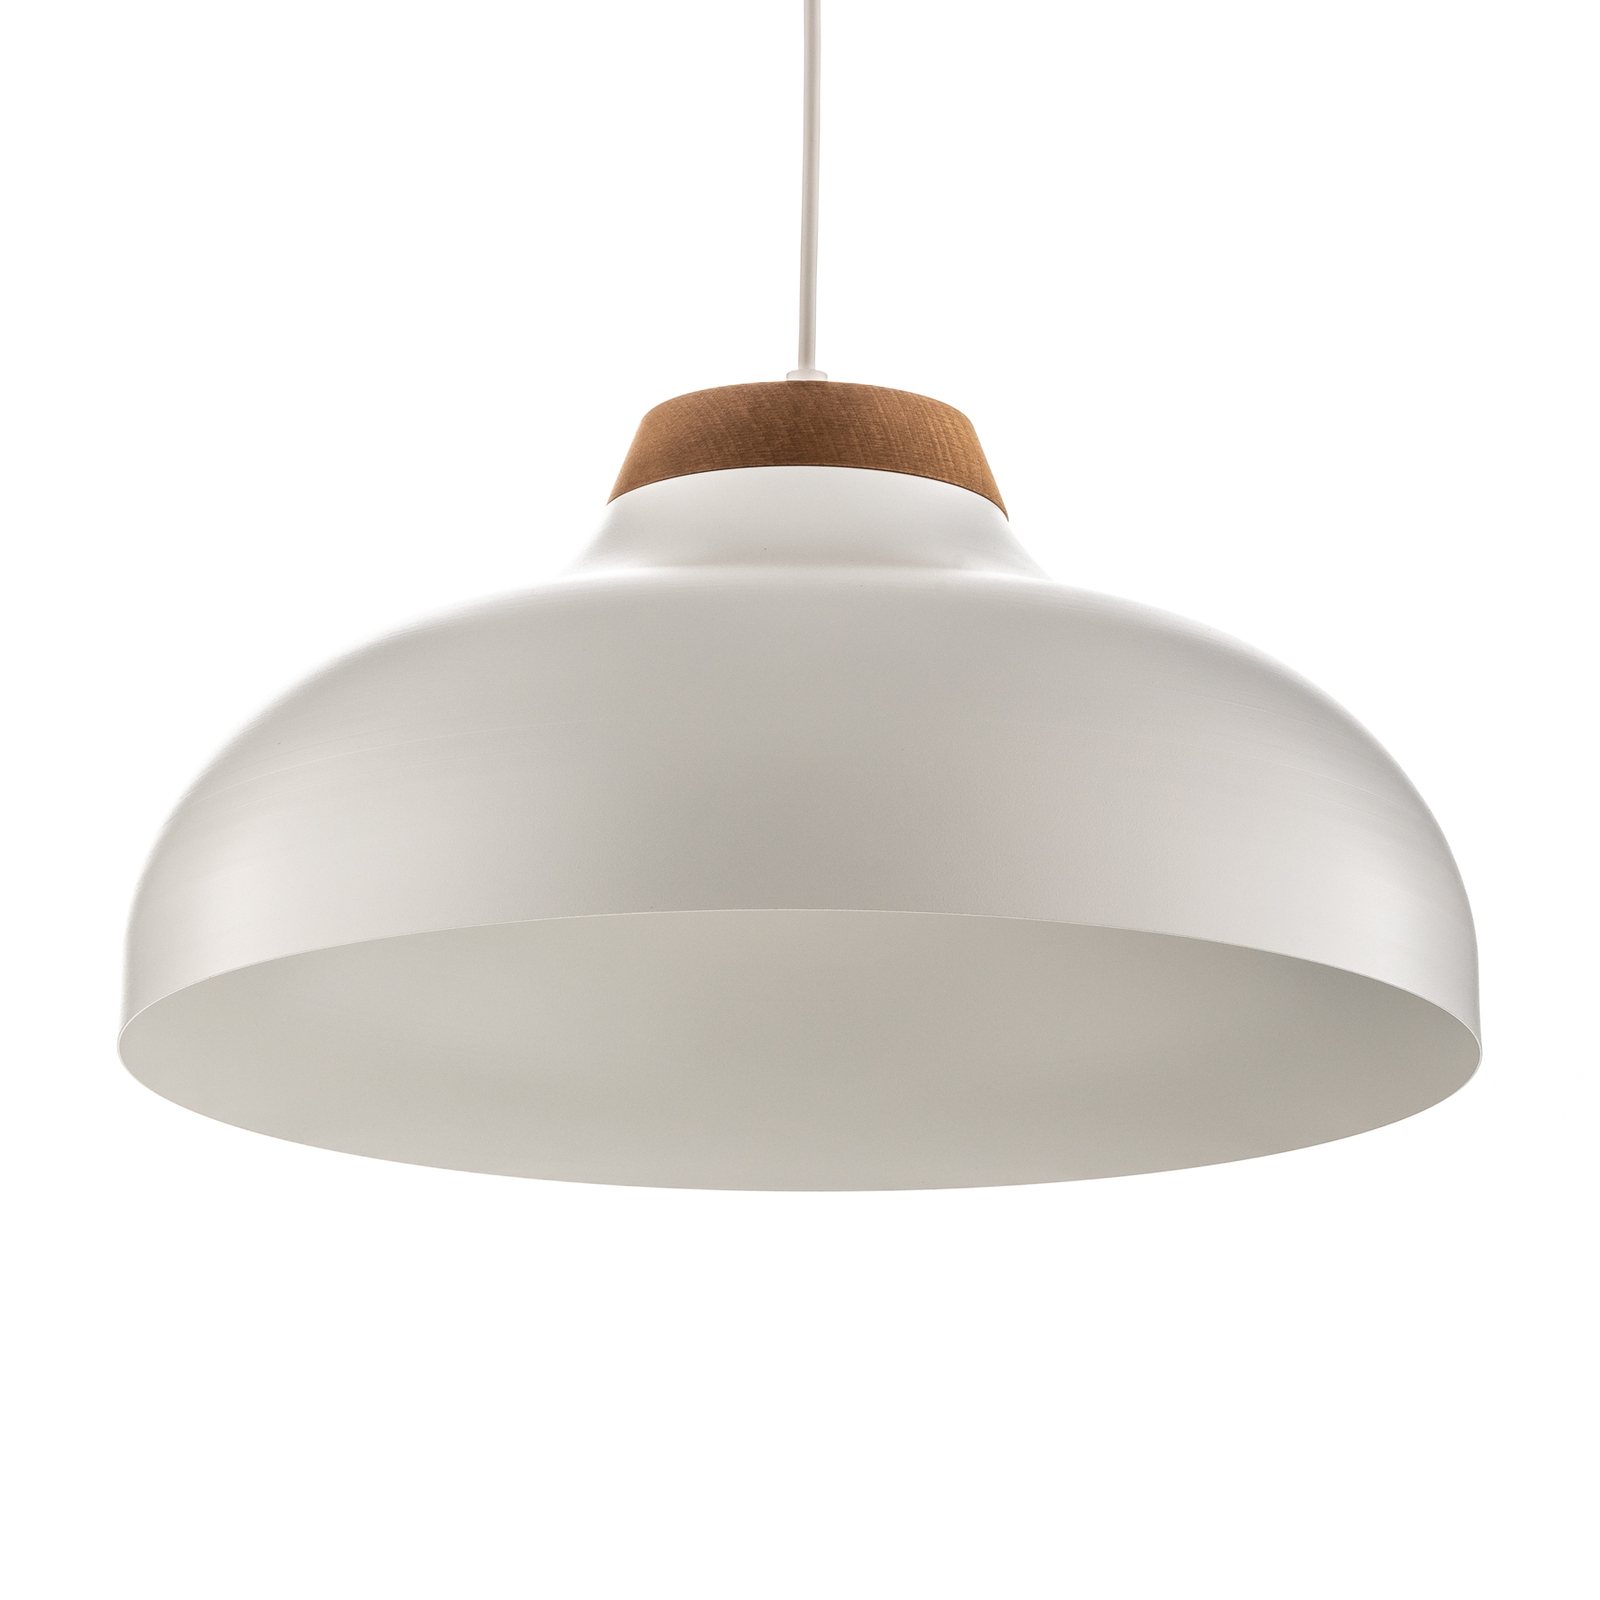 Gus pendant light with metal shade, white